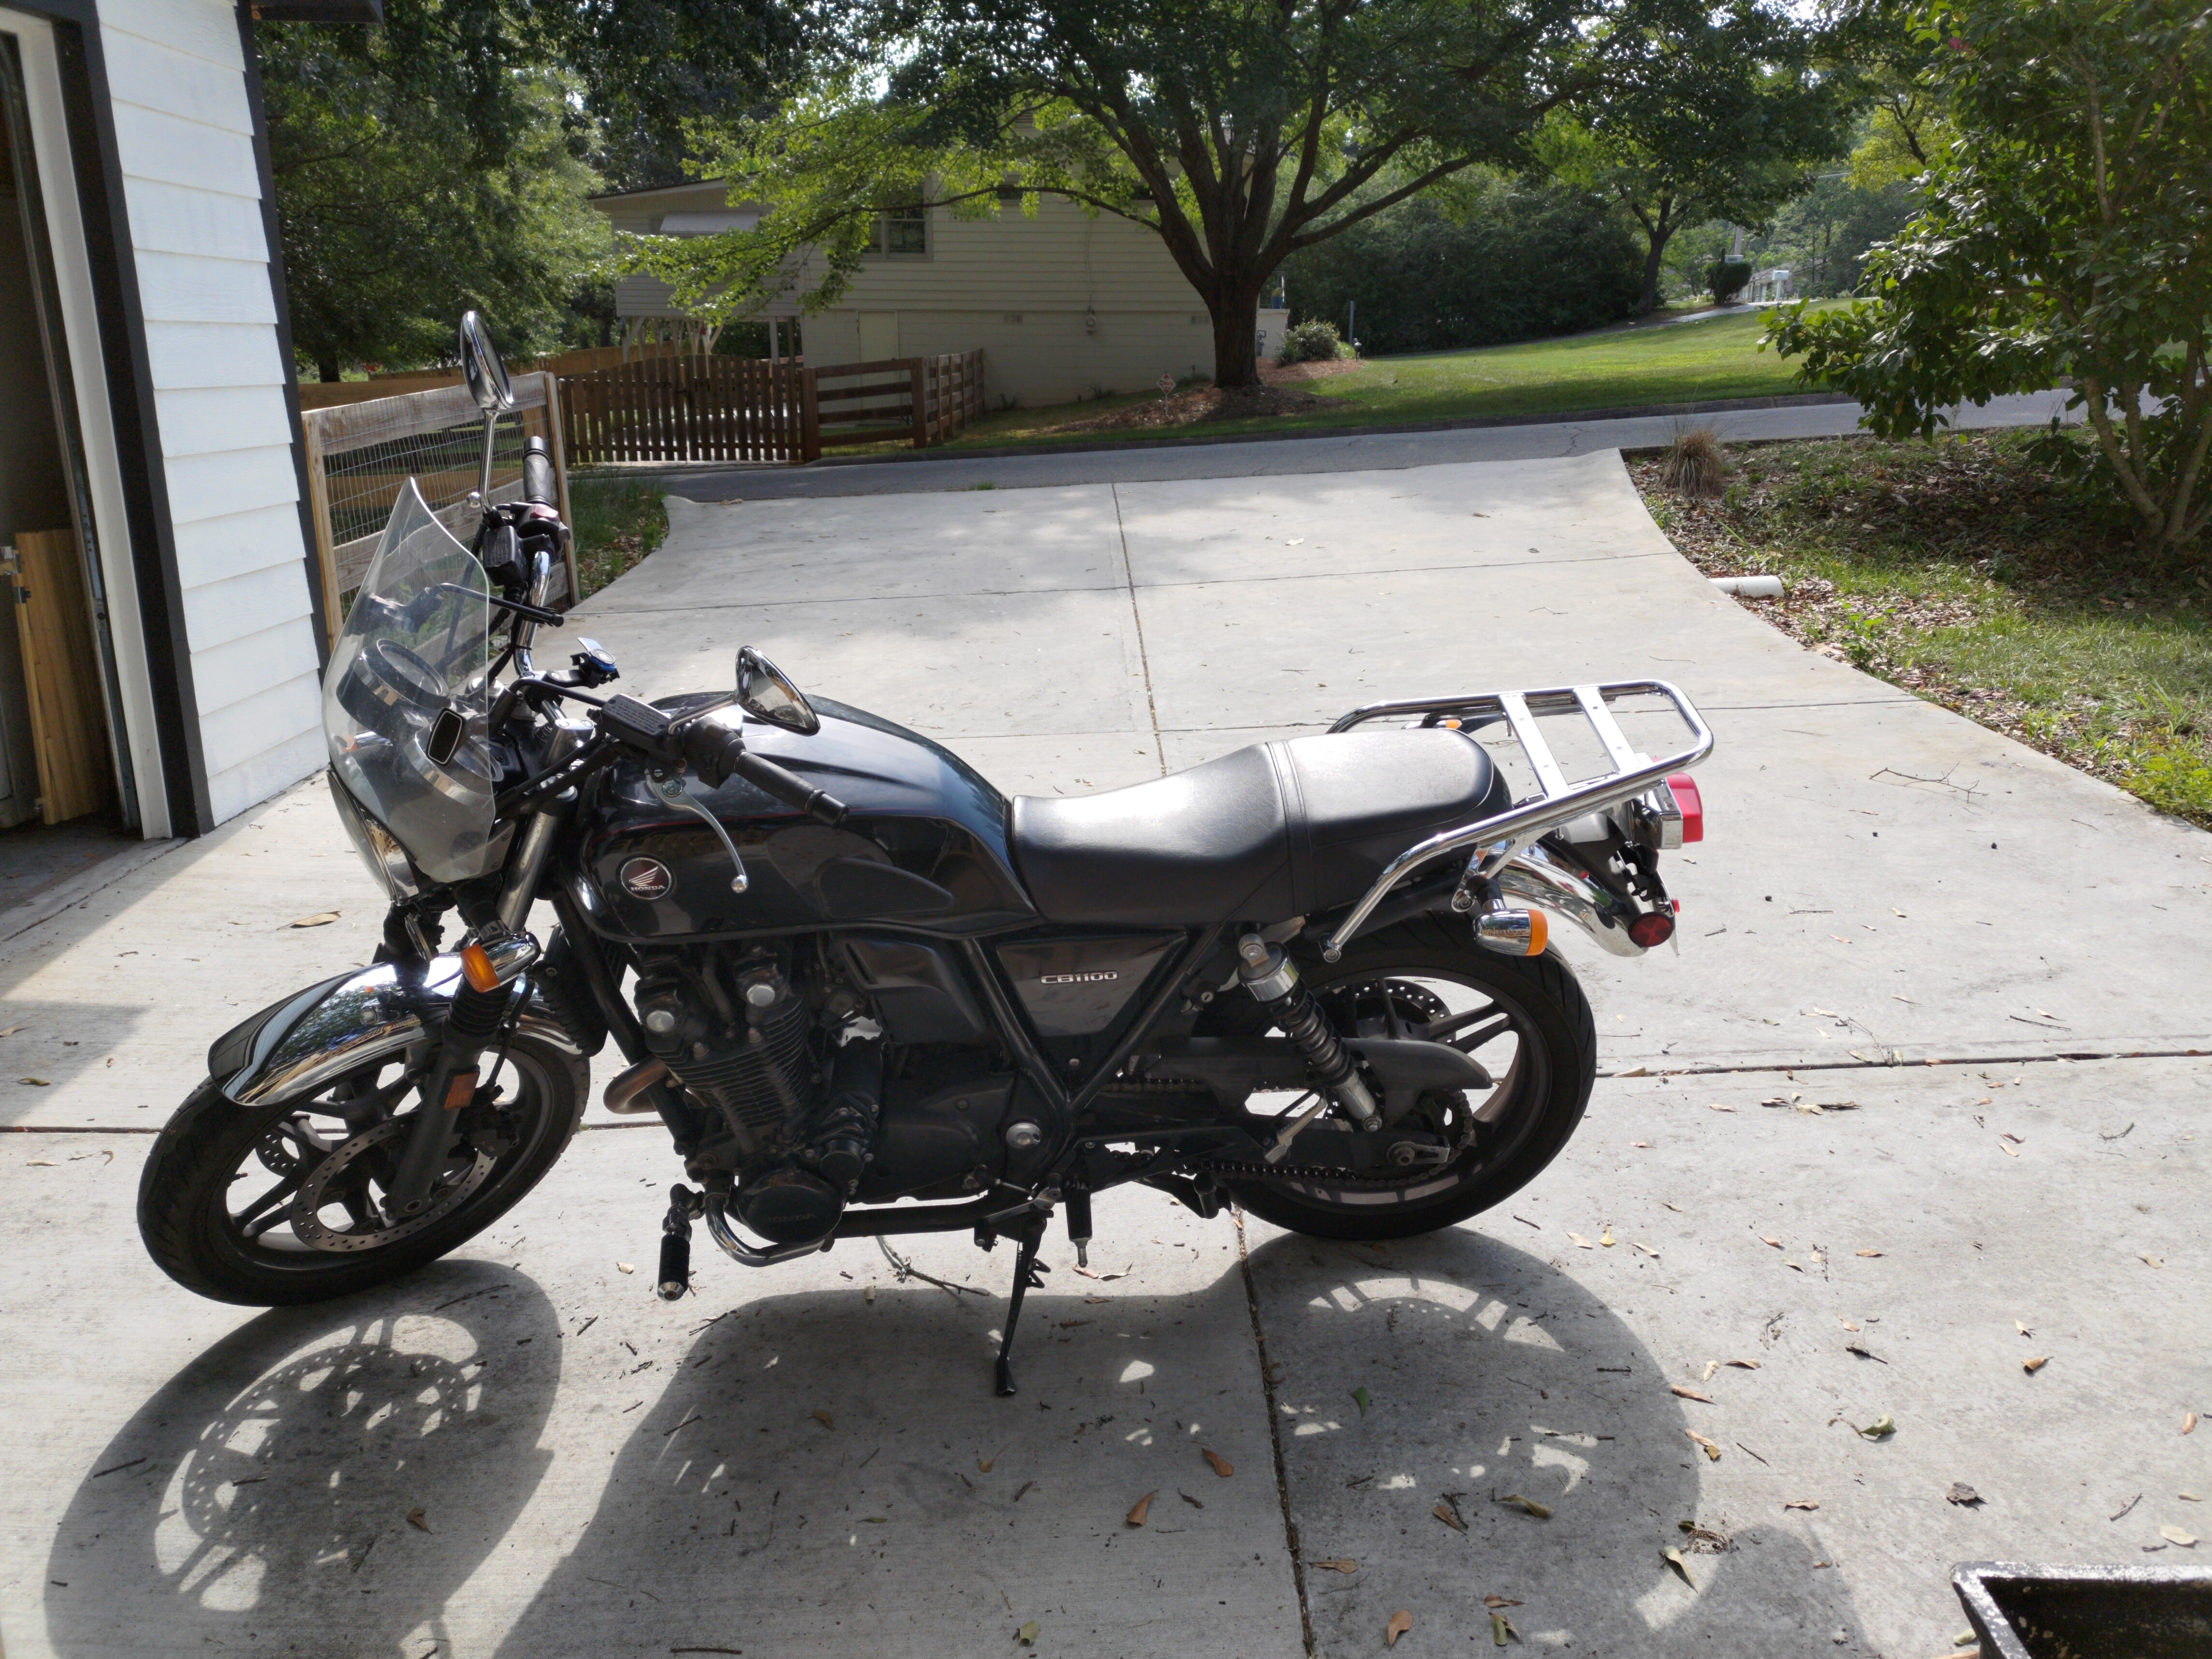 drive side of a Honda CB1100 with a windscreen and luggage rack